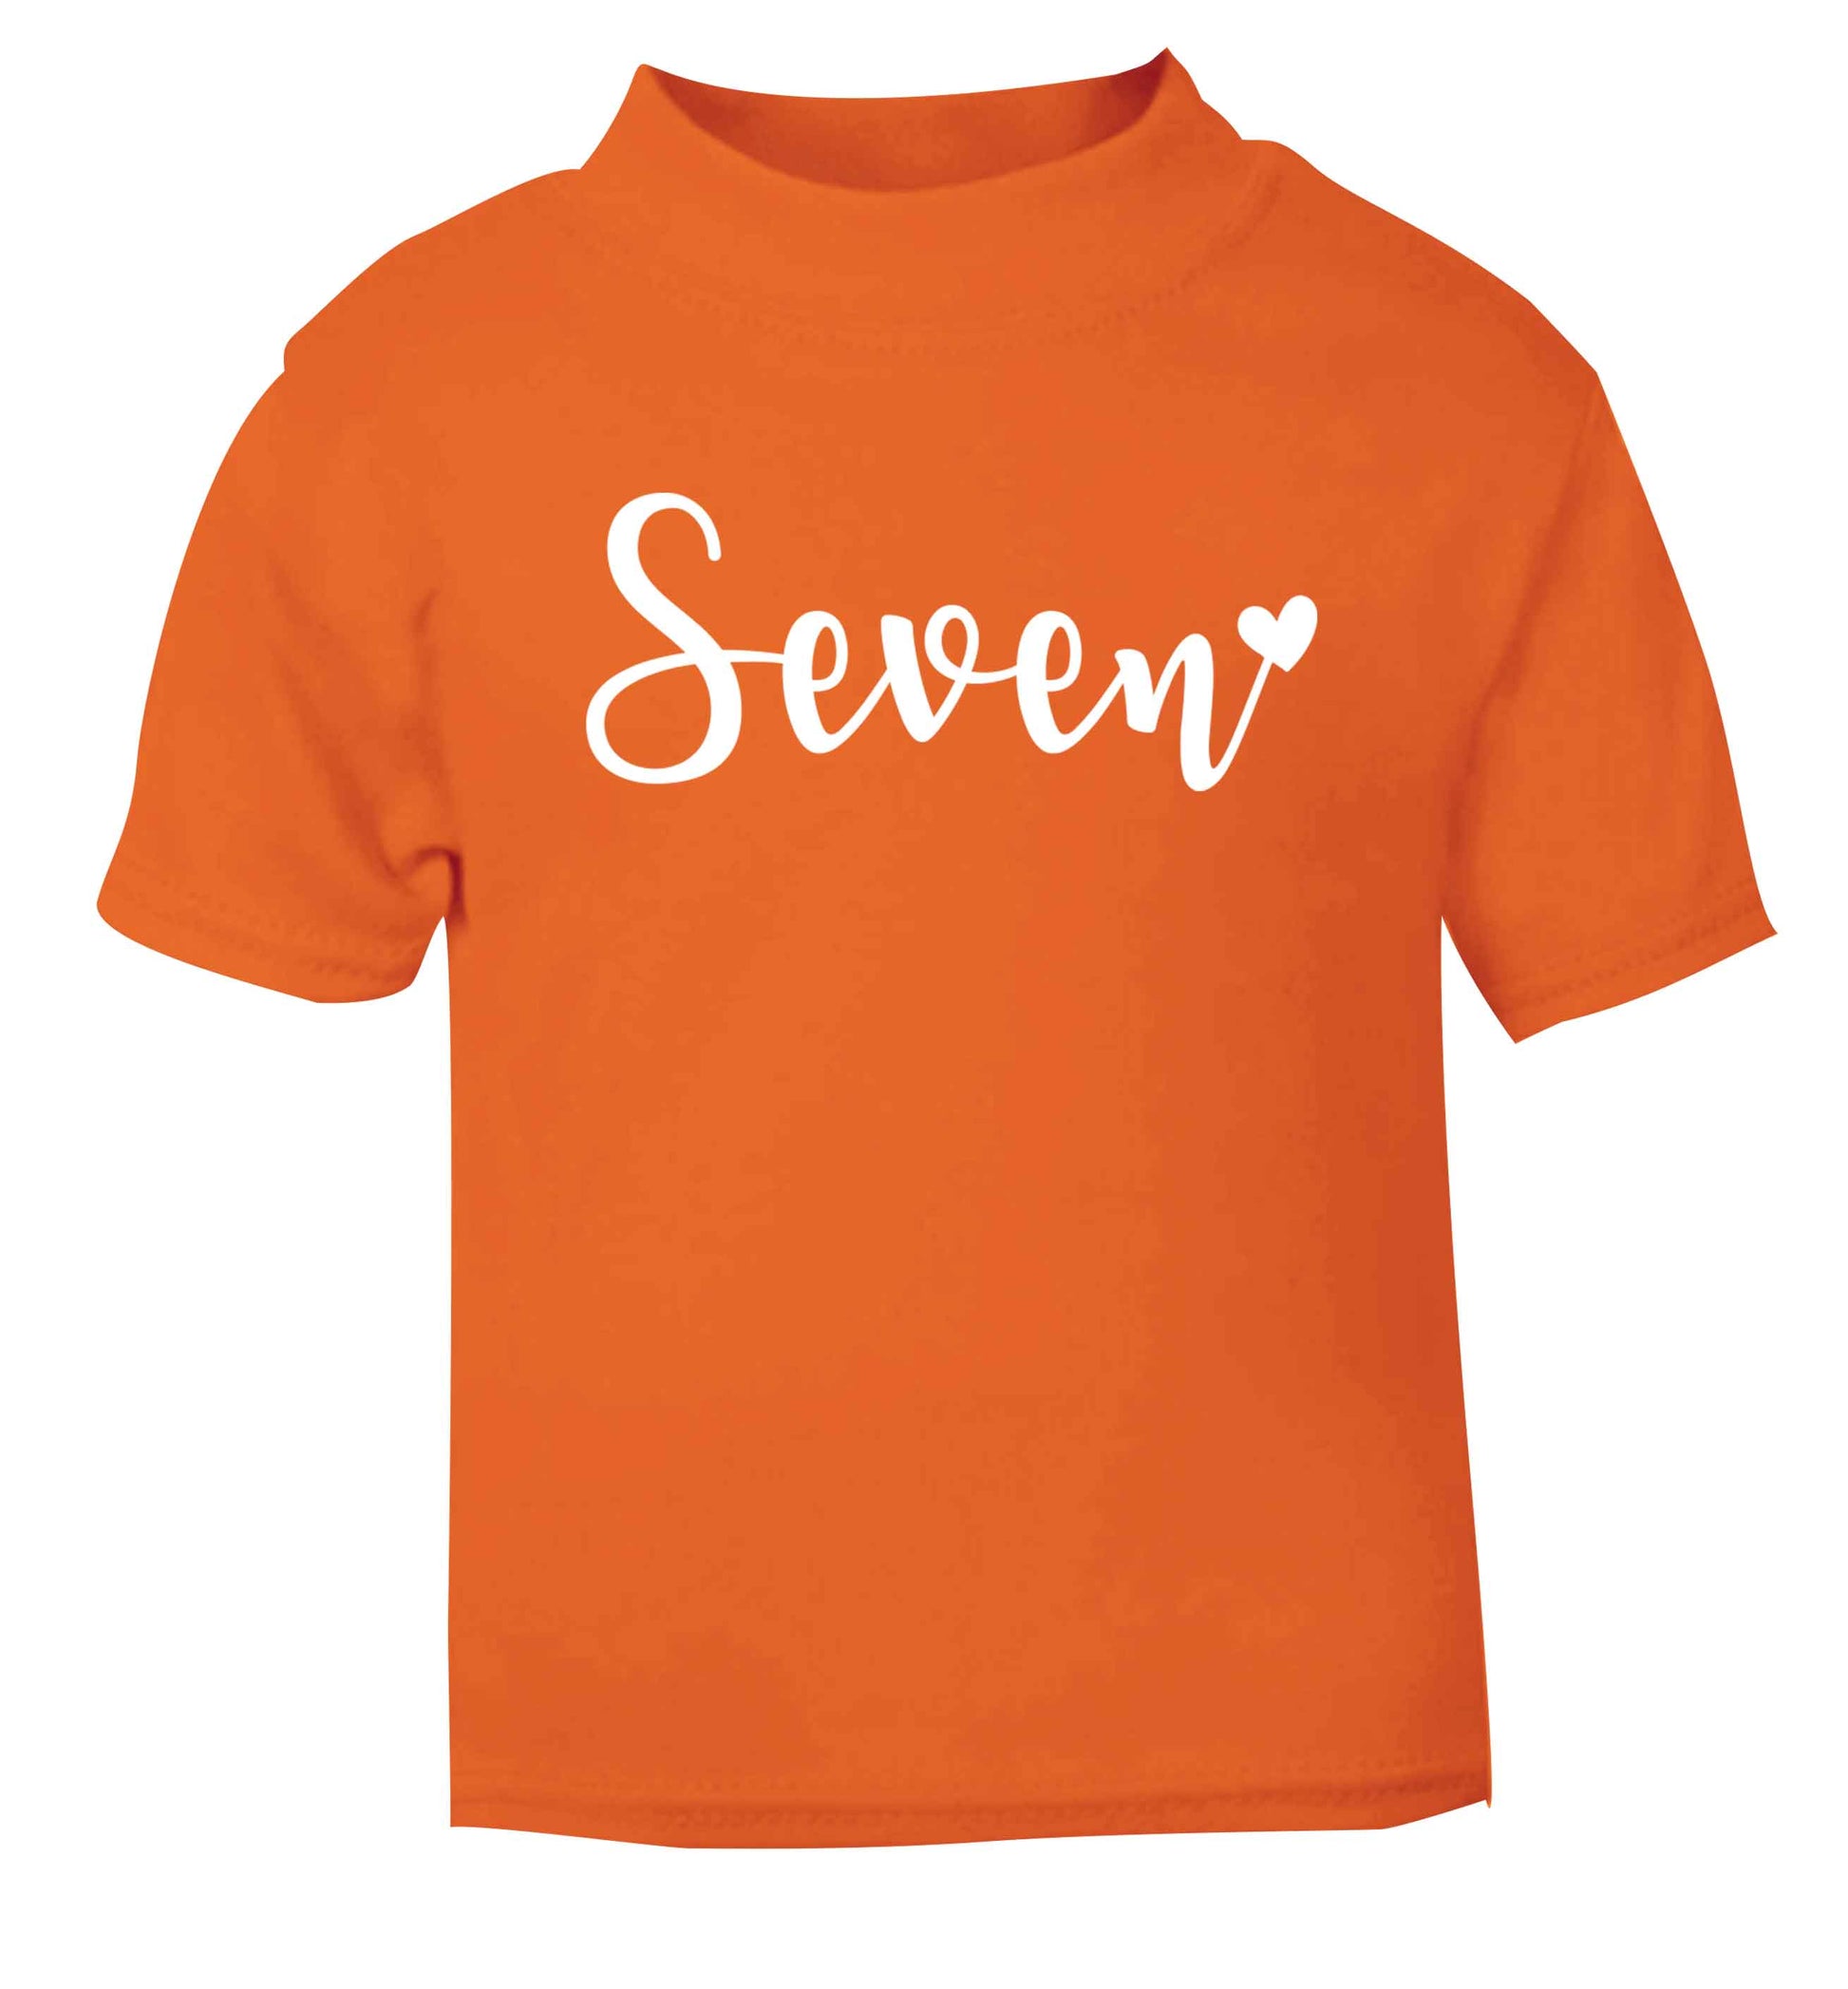 Seven and heart orange baby toddler Tshirt 2 Years